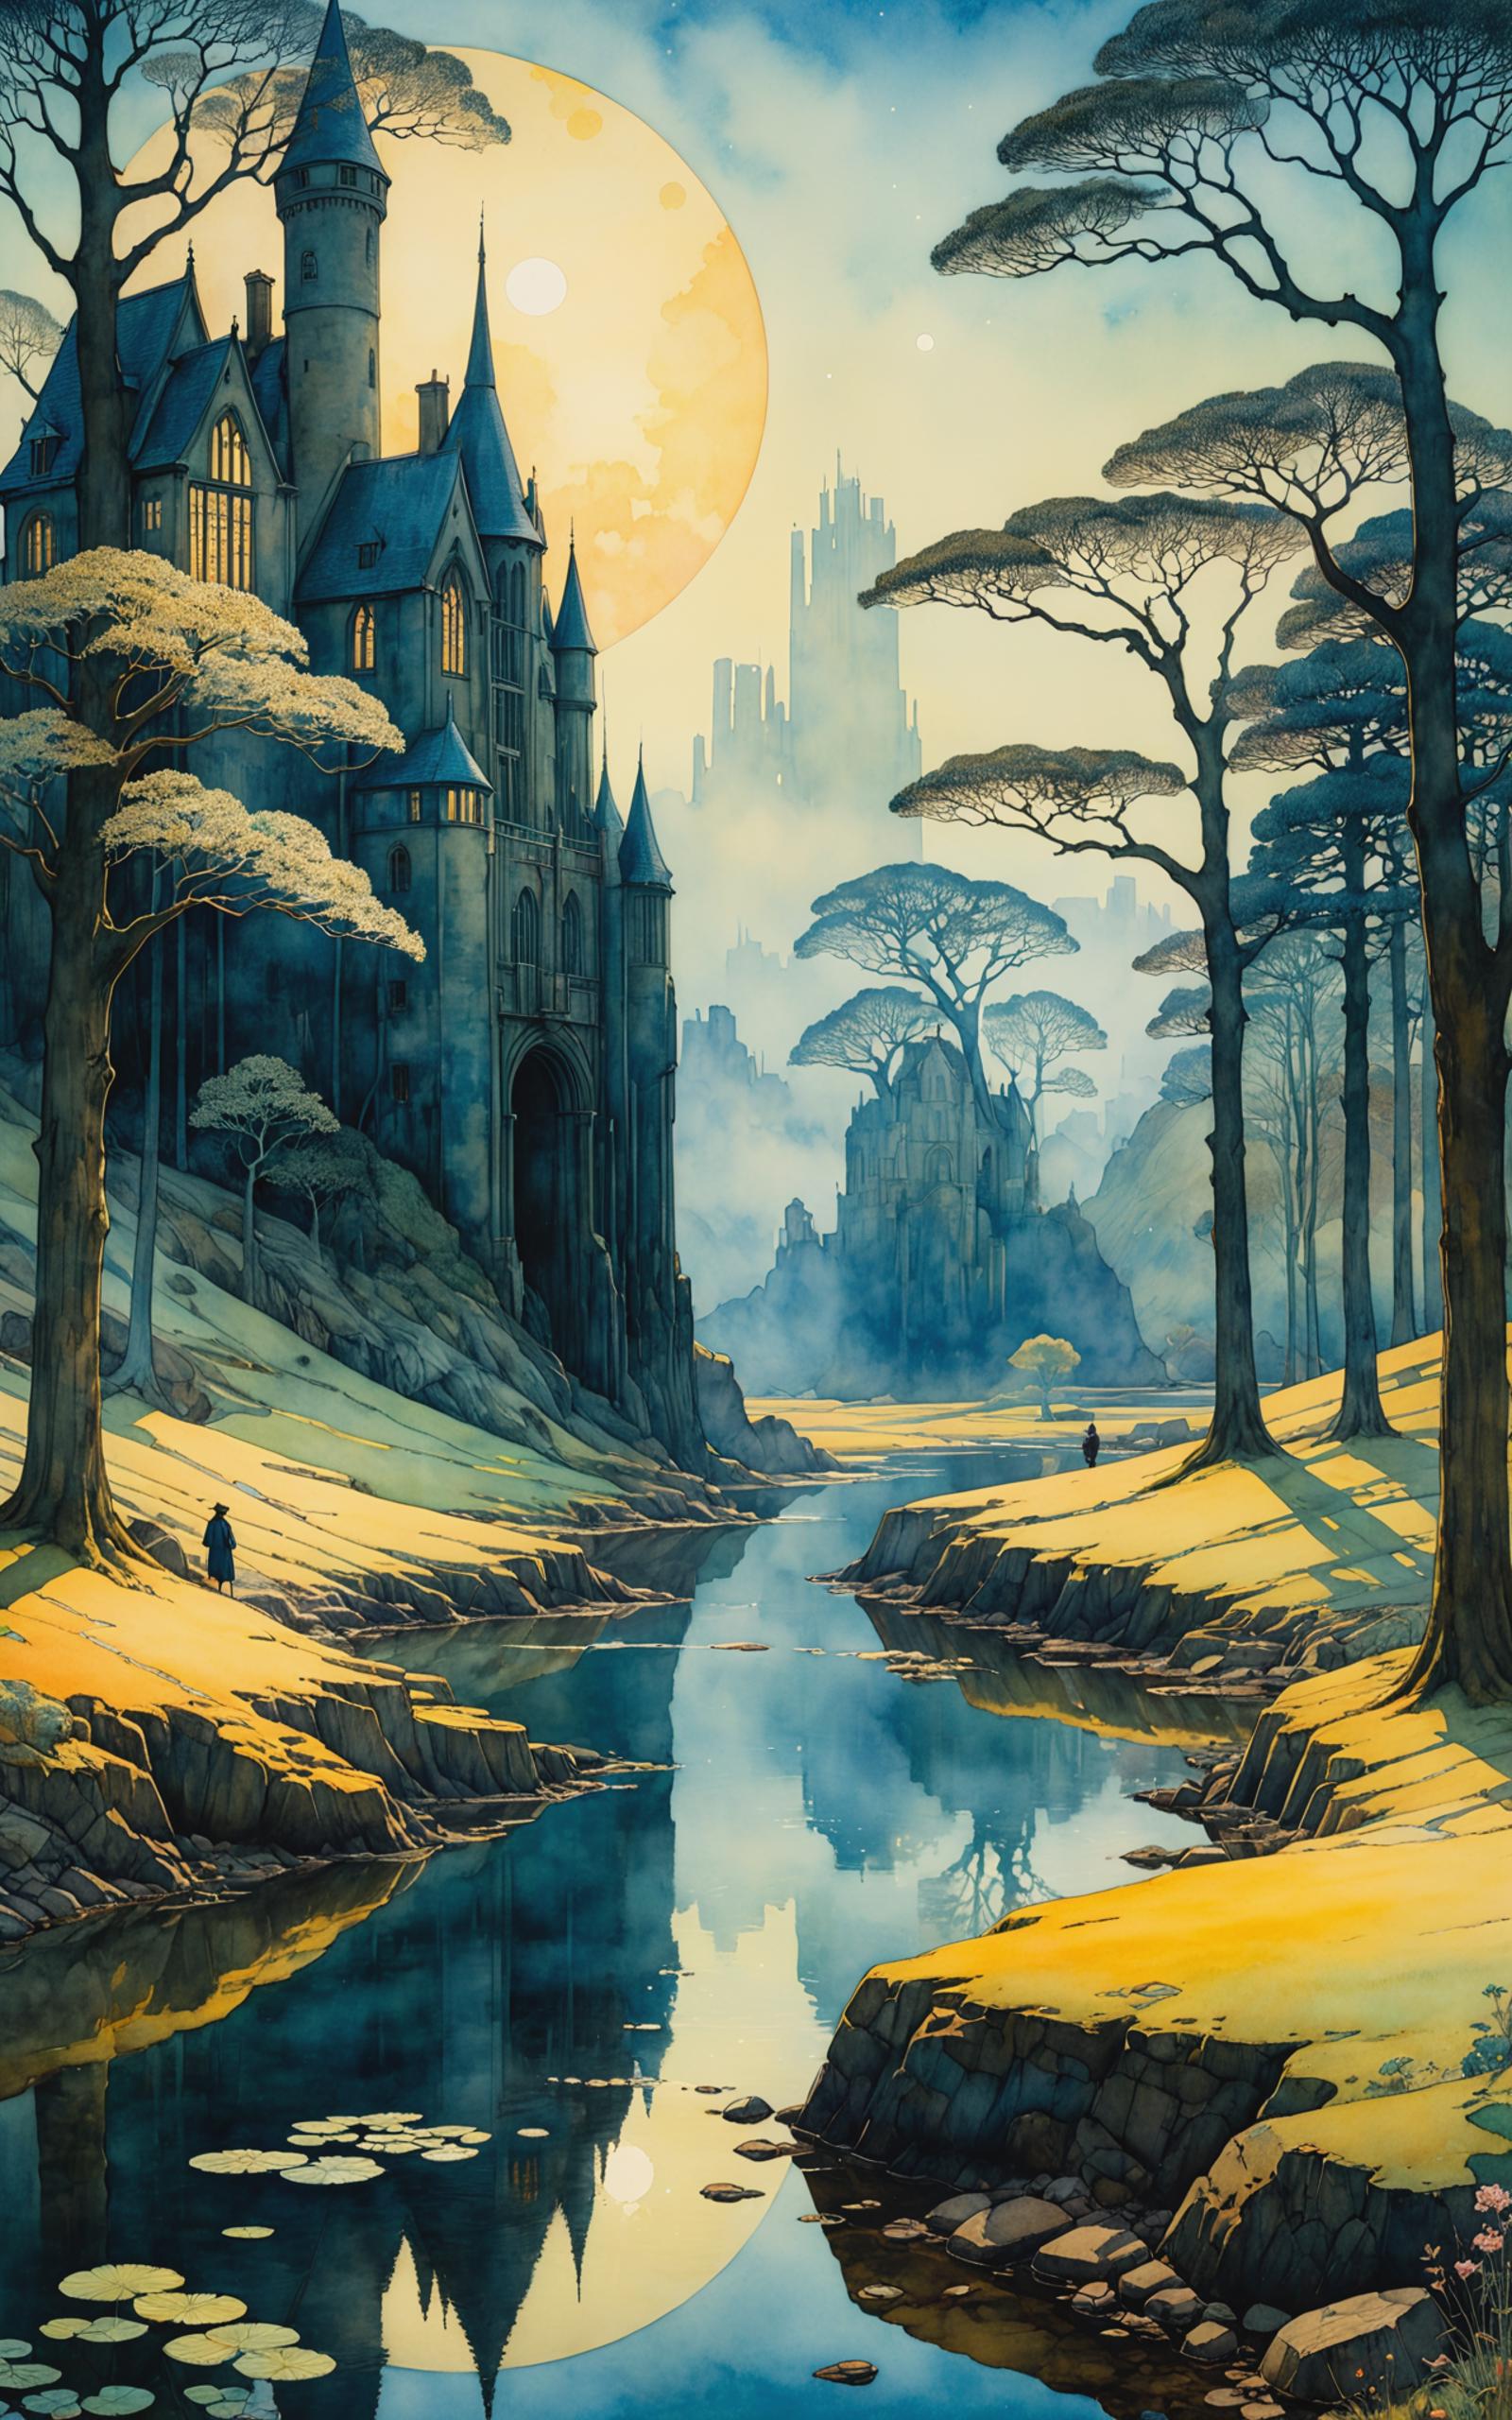 A Fantasy Painting of a Castle, Trees, and a River